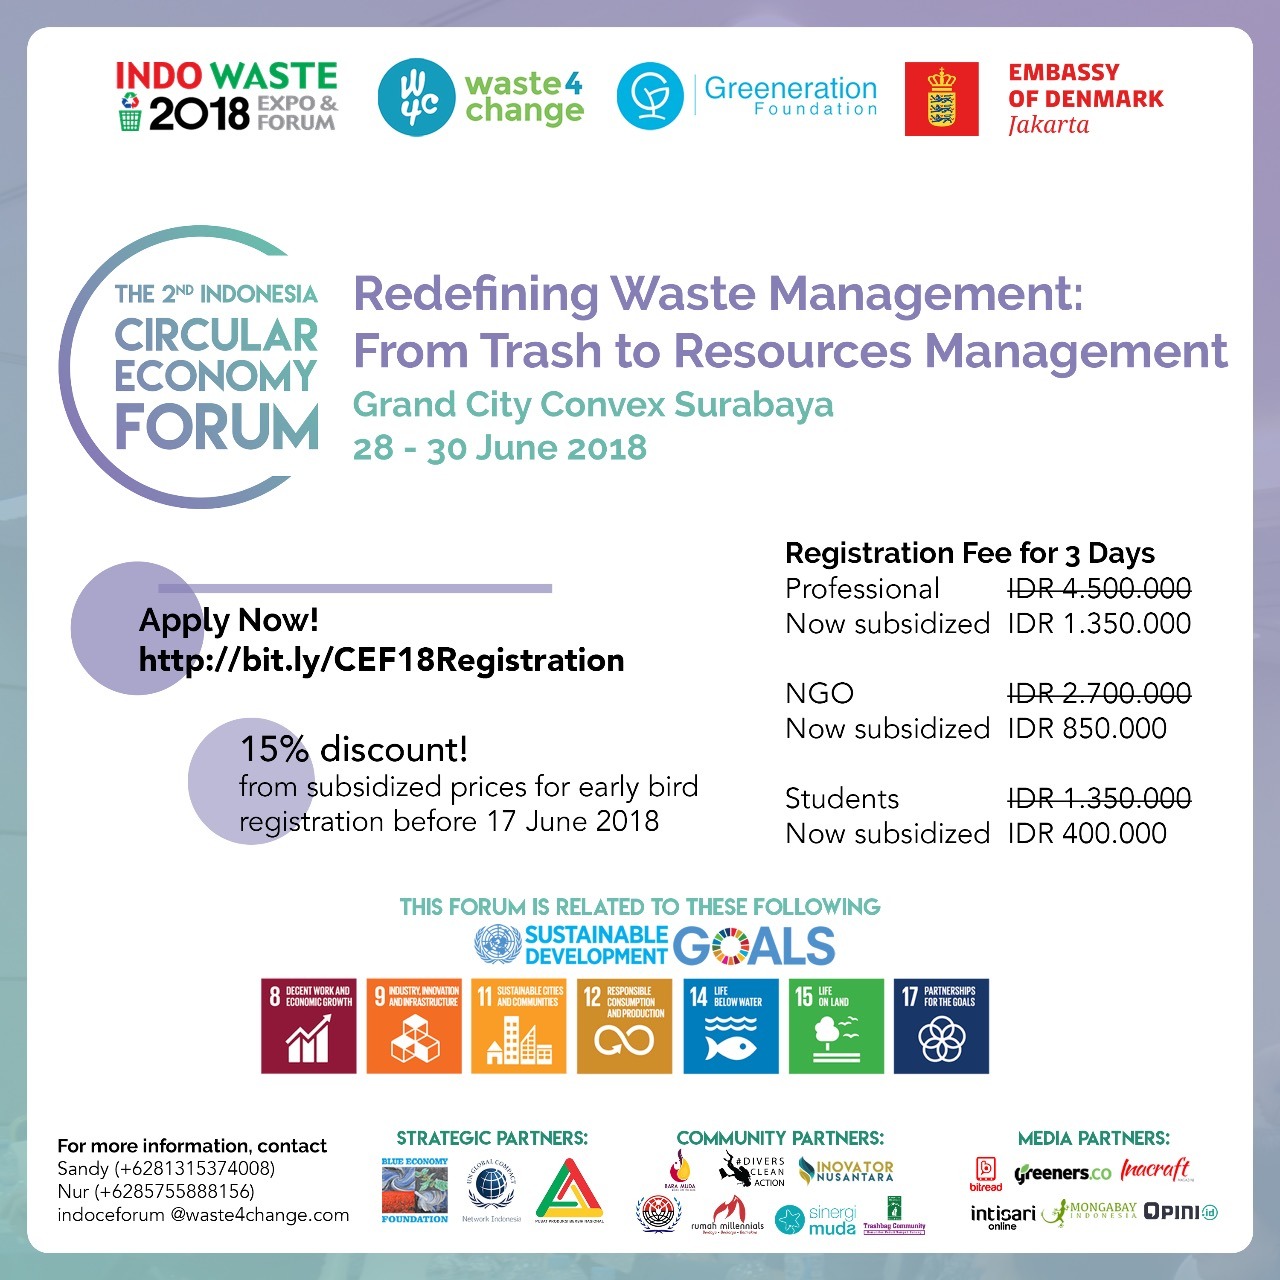 THE 2nd INDONESIA CIRCULAR ECONOMY FORUM 2018 at Indo Waste Expo 2018